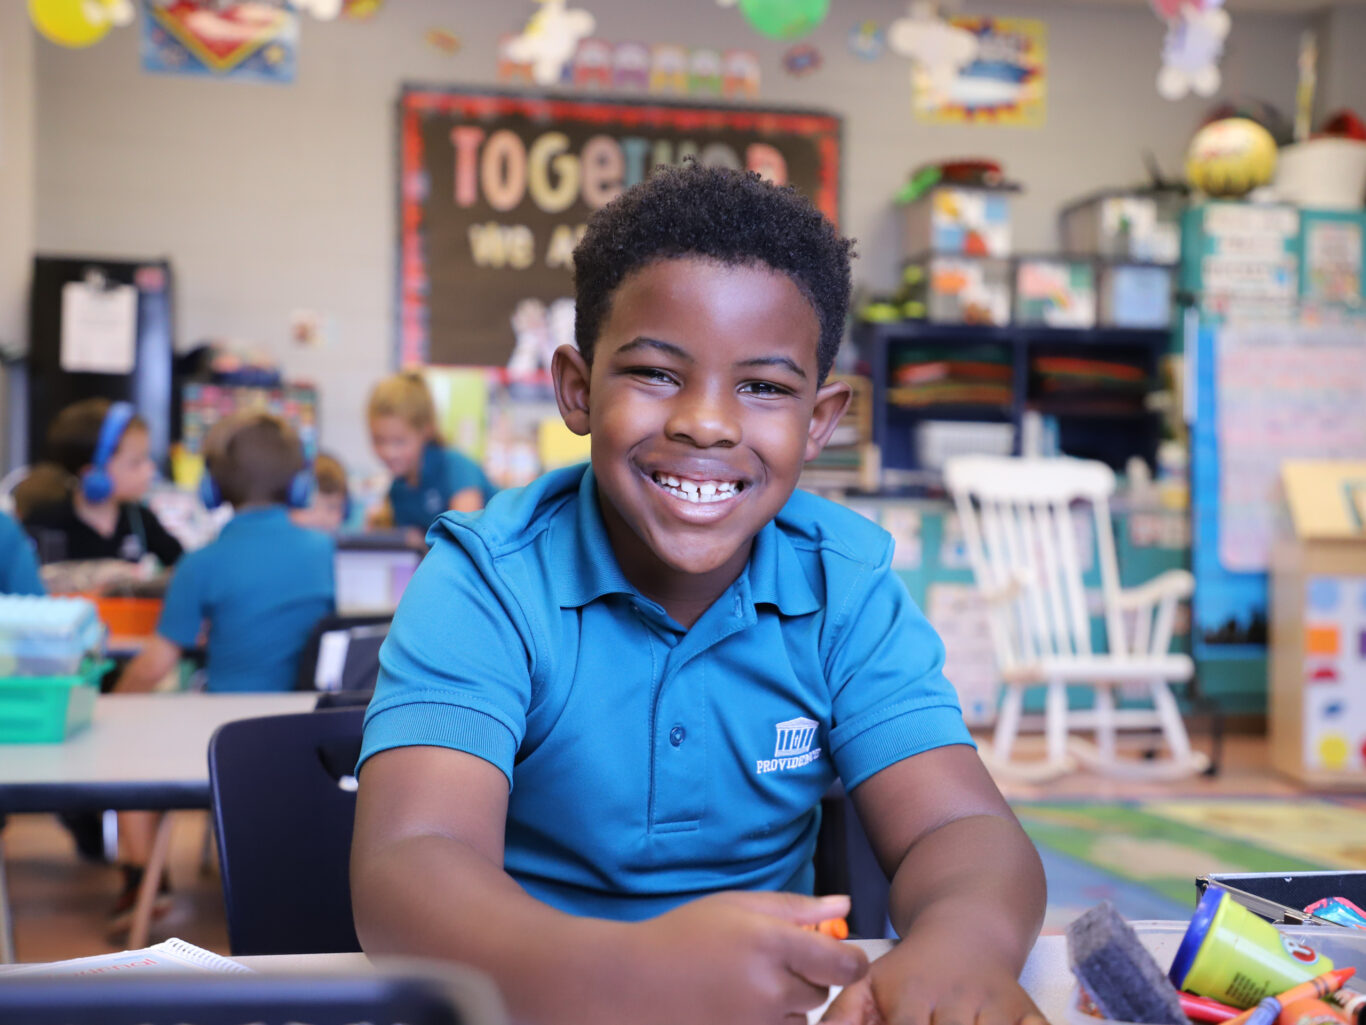 A young boy smiling at a desk in a classroom, showcasing his enthusiasm for learning and future employment prospects.